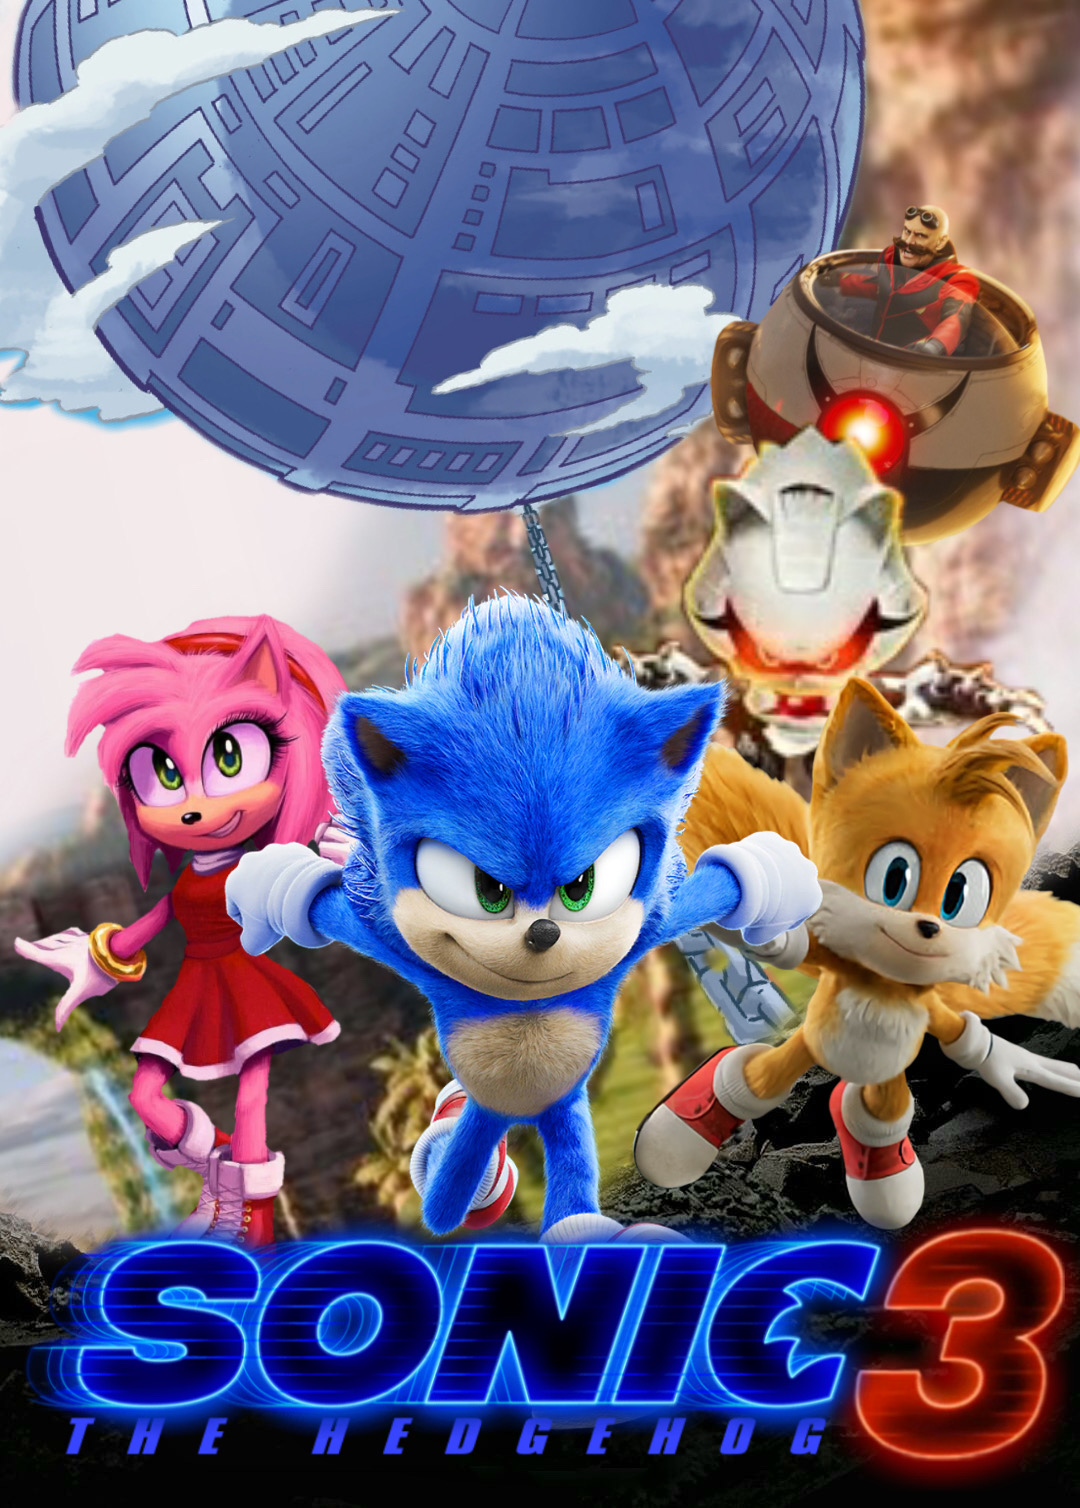 Sonic Movie 3 Poster(Fan Made) by TailsTheDesigner92 on DeviantArt